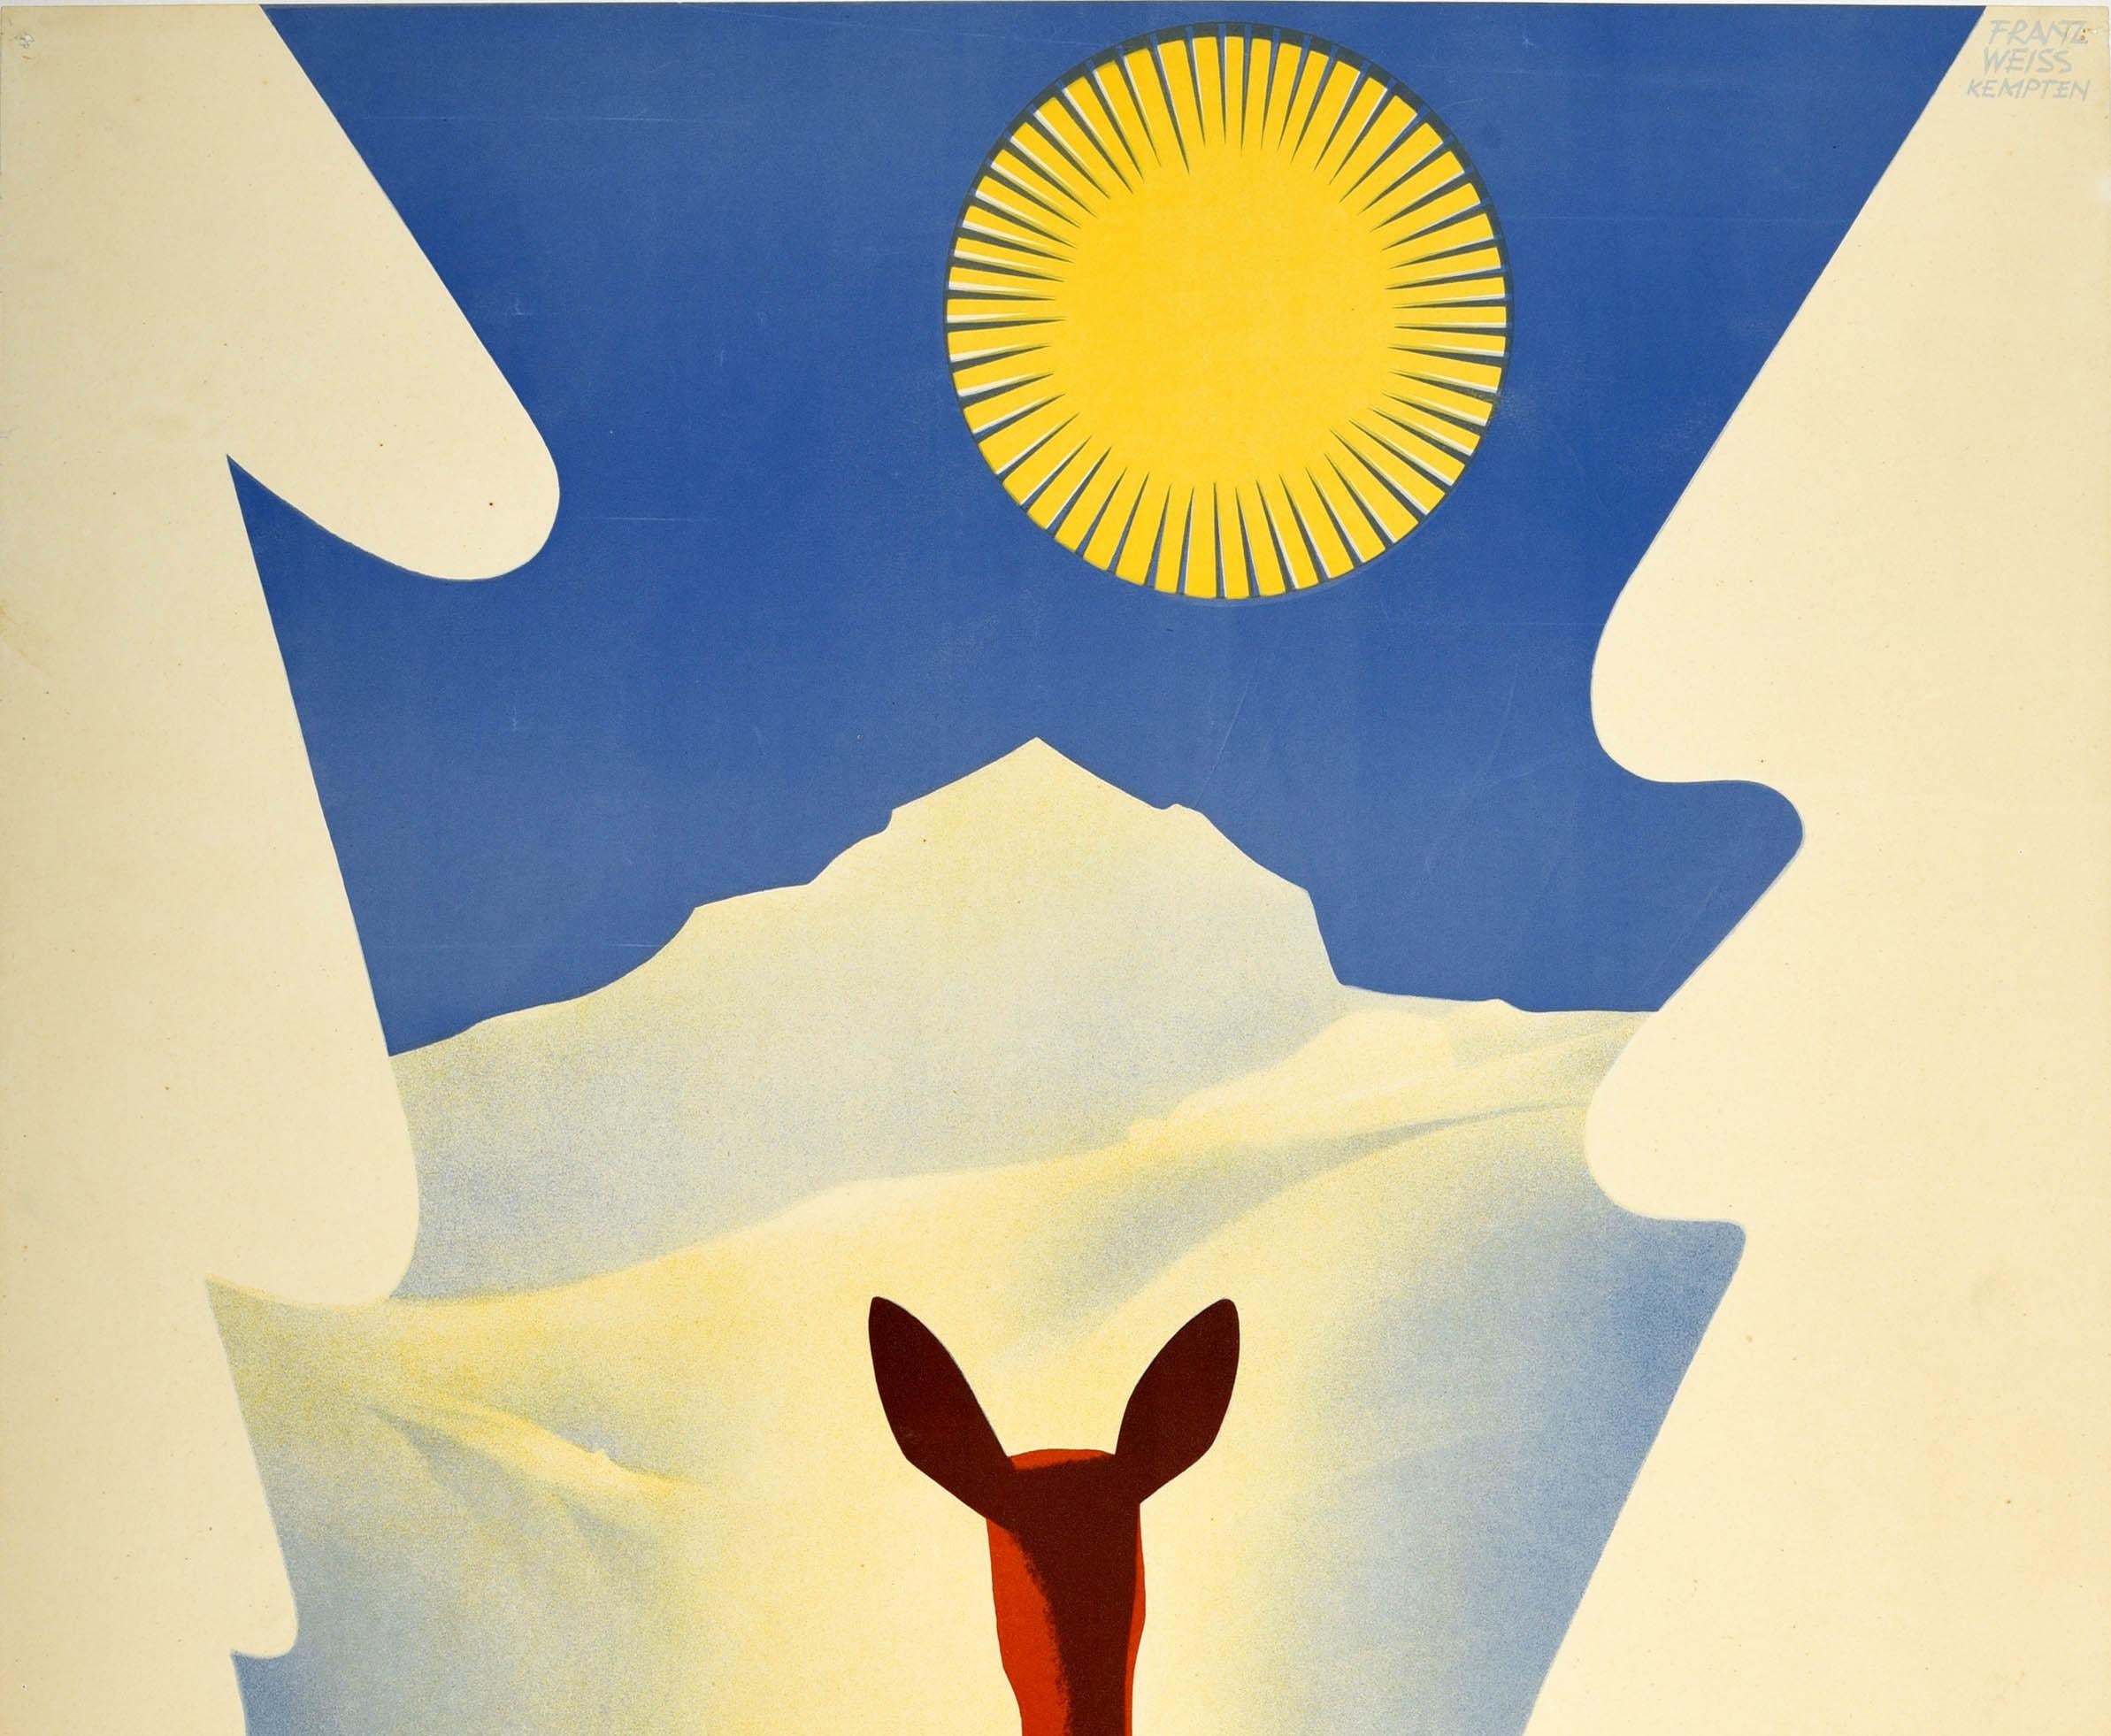 Original vintage winter travel poster for Allgau featuring stunning artwork by the painter and graphic designer Franz Weiss (1903-1981) featuring a deer standing between two snow white trees in the foreground with a skier skiing down a slope to a